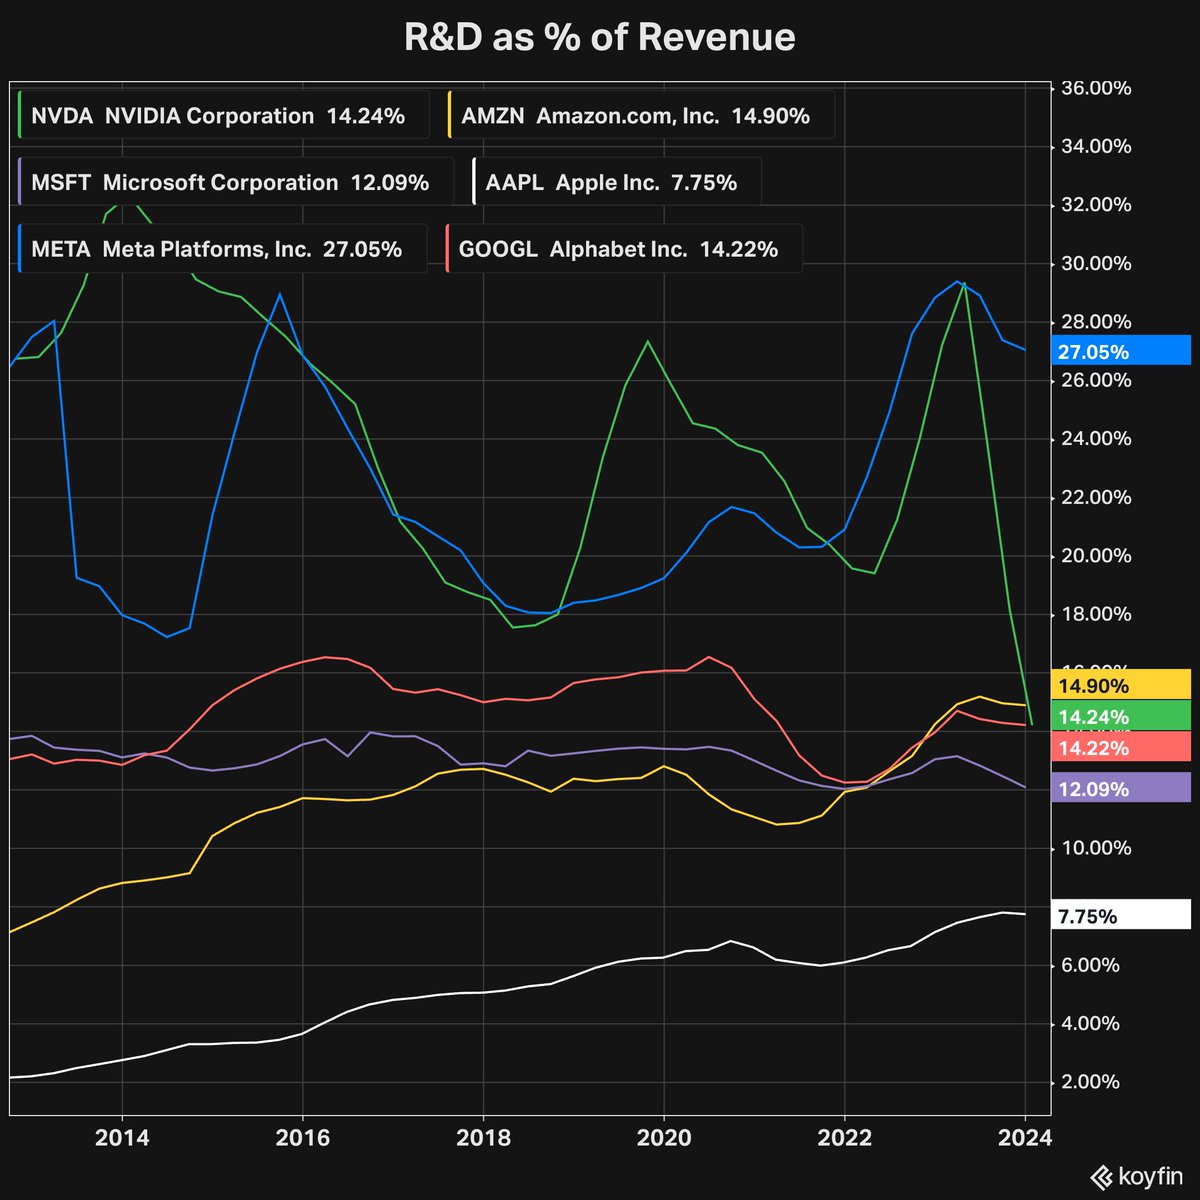 It's remarkable when you look at the notional value of R&D that Amazon $AMZN spends relative to the rest of the tech giants. Normalised for revenues, however, Meta $META and Nvidia $NVDA are often the biggest spenders in that department.